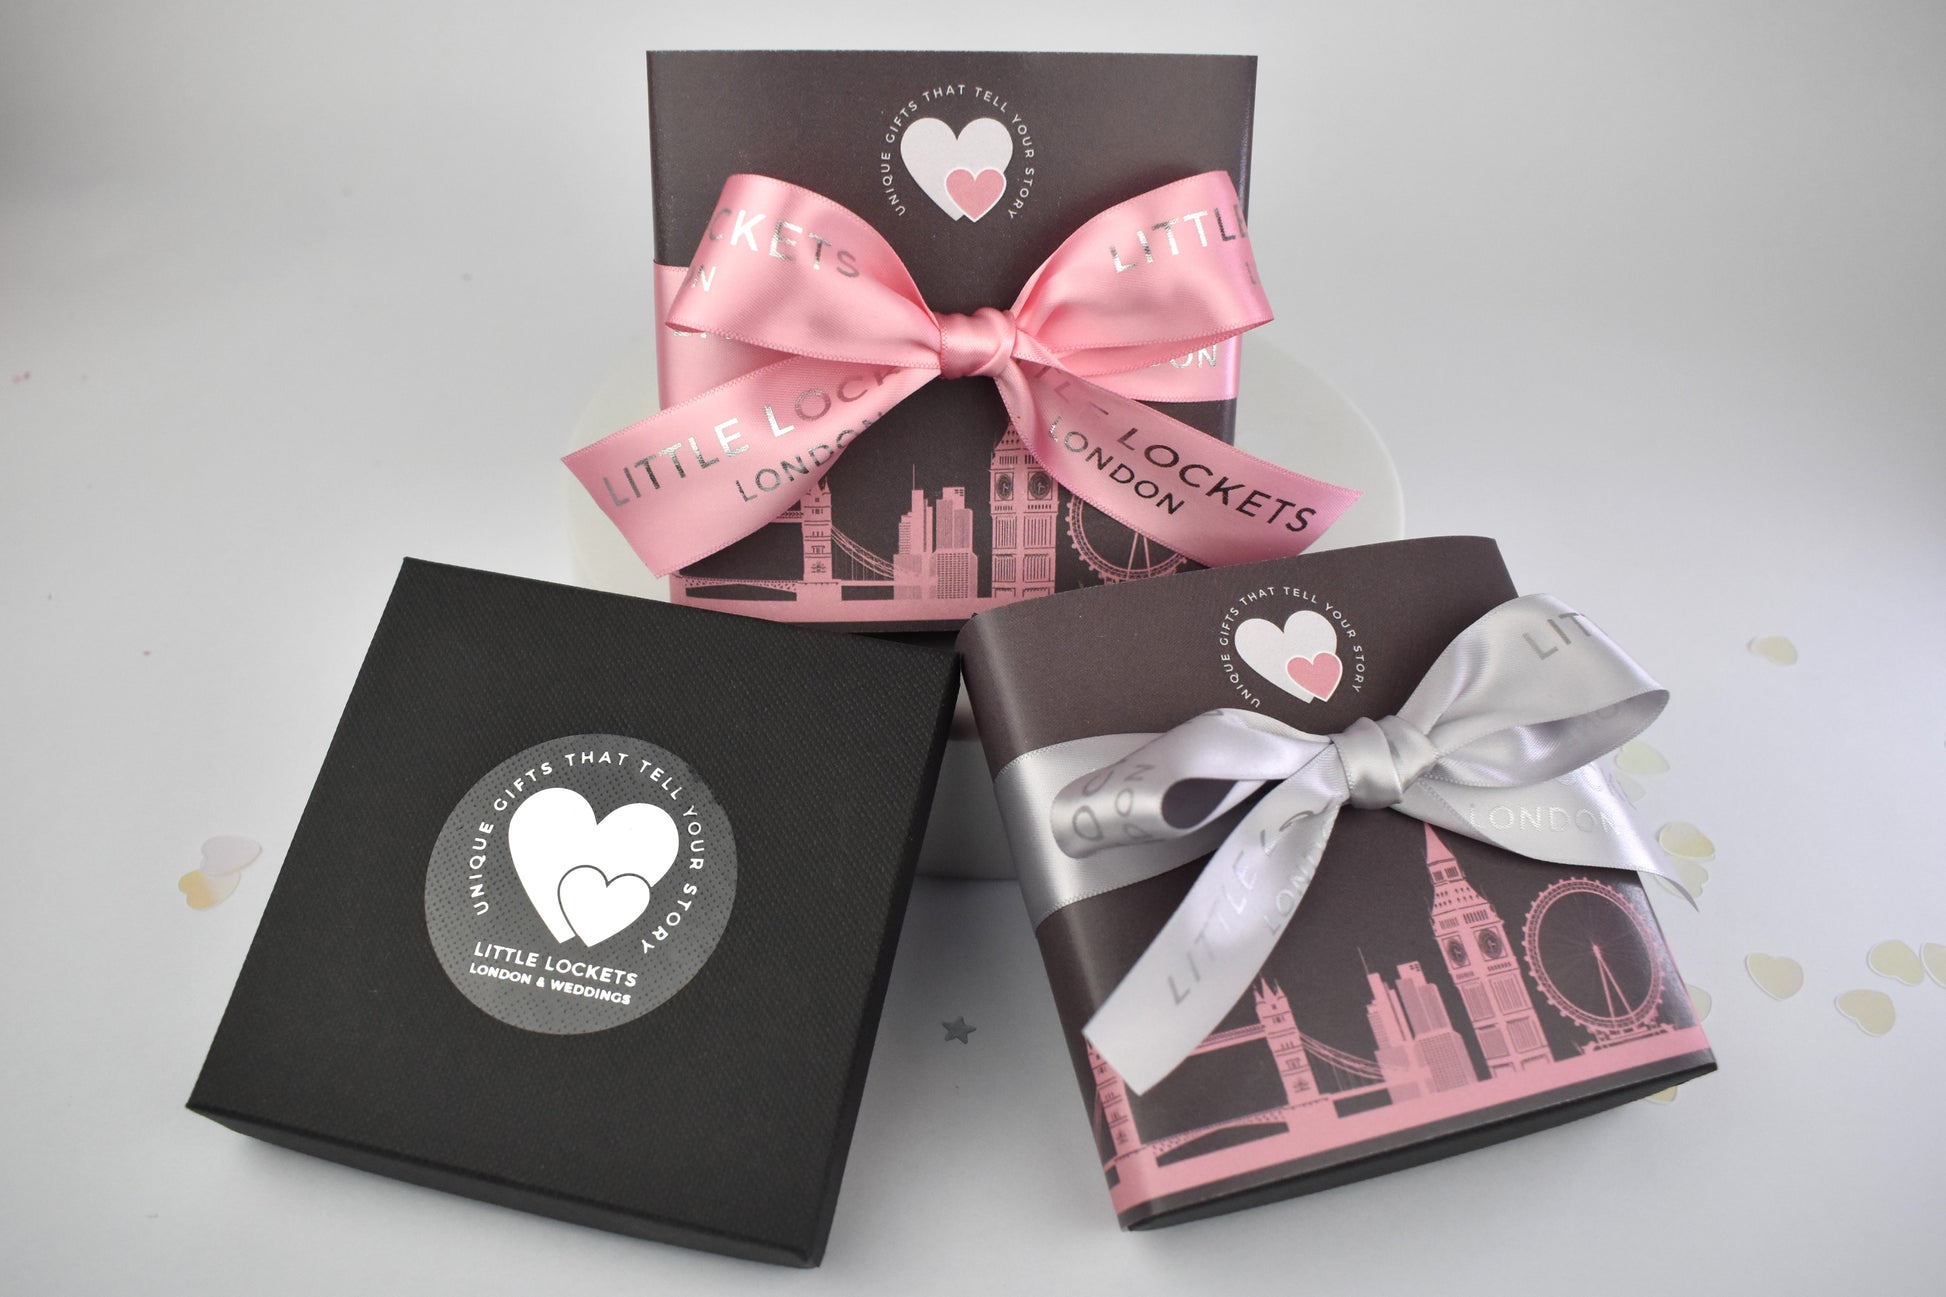 Your choice of gift wrap - free logo box or upgrade to a London skyline wrap and ribbon tie